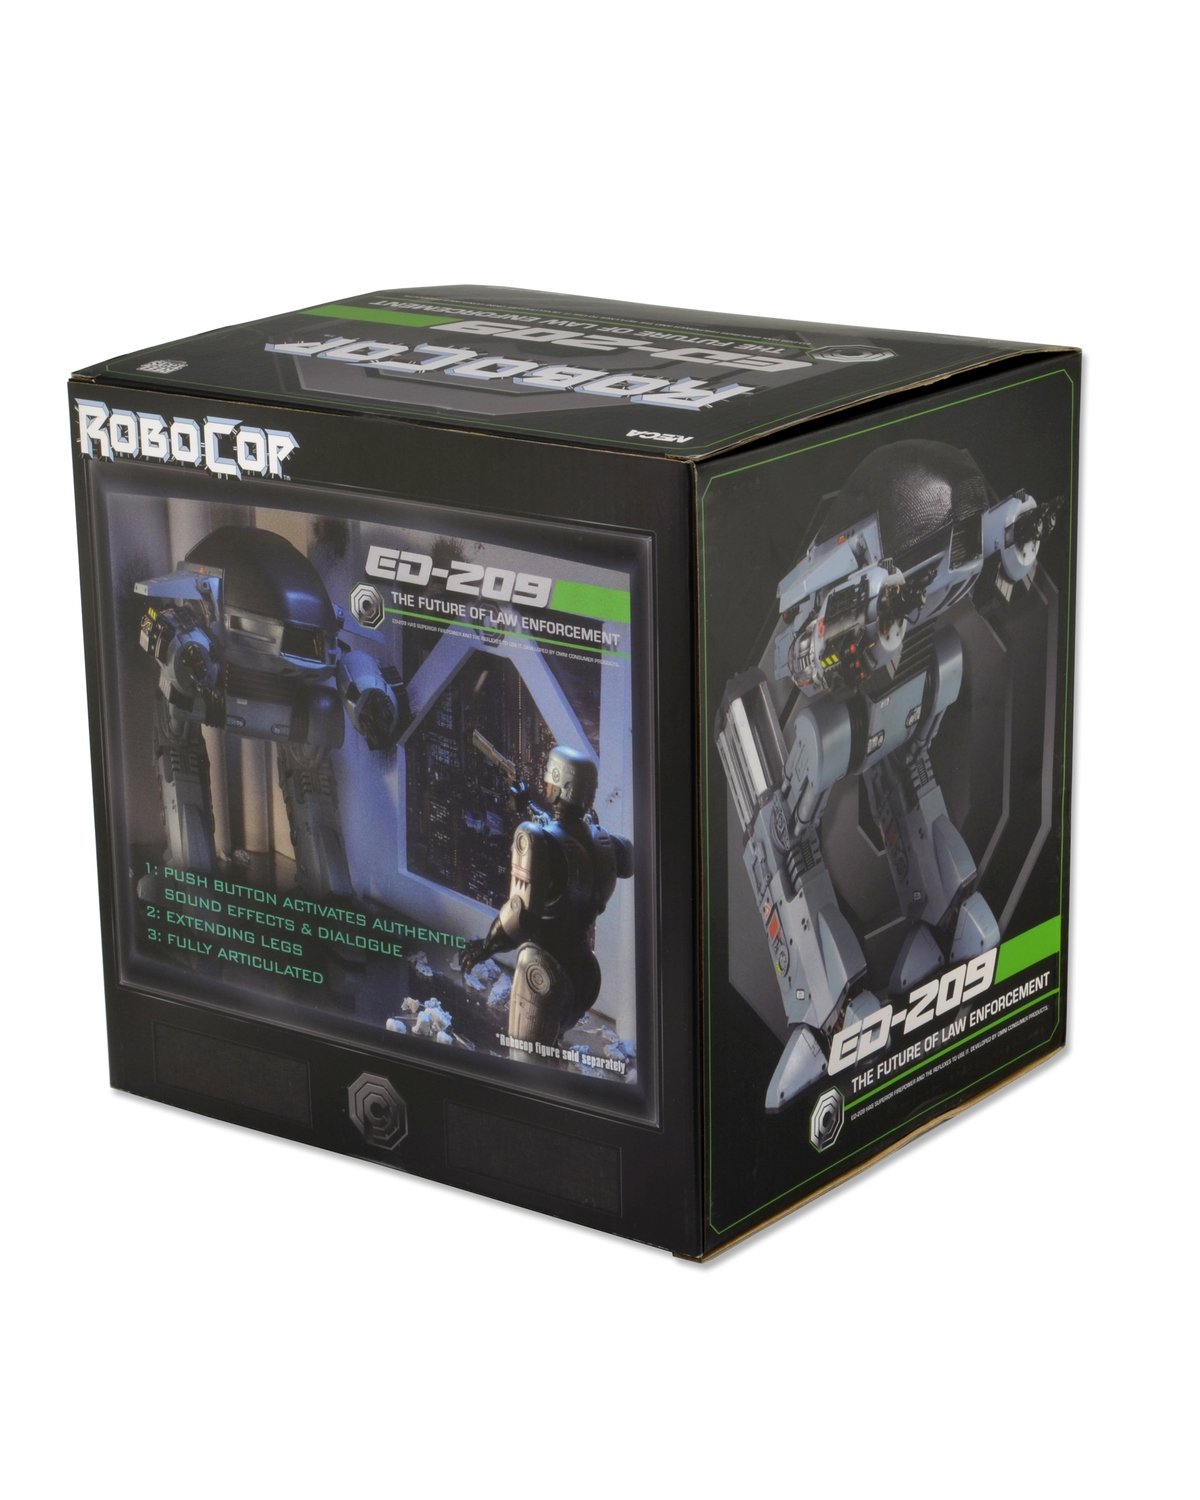 NECA Robocop ED-209 Boxed Action Figure with Sound